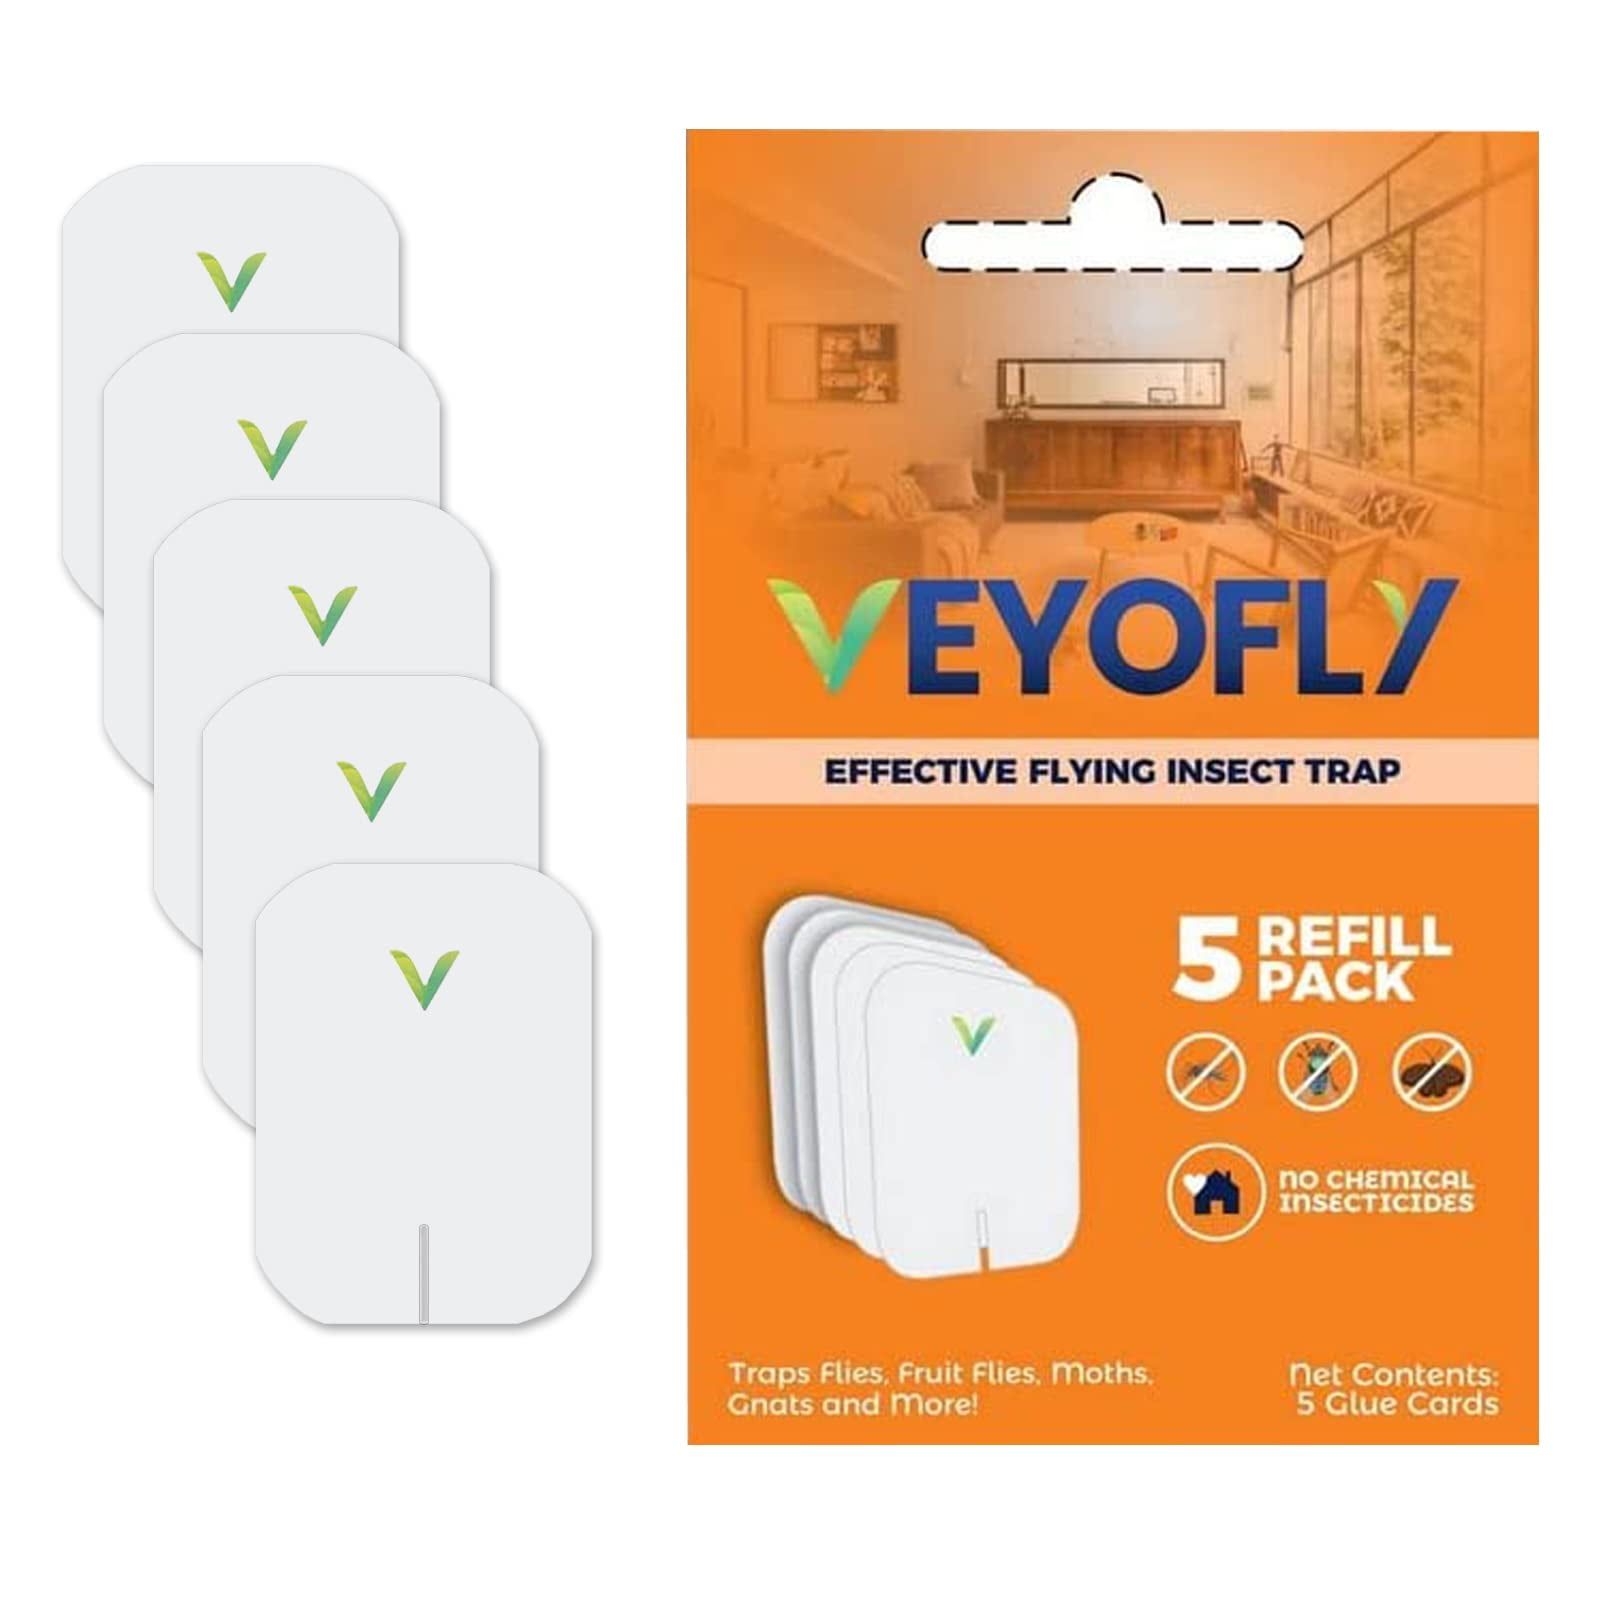 1 VEYOFLY Refill Flying Insect Trap, glue Board Insect catcher